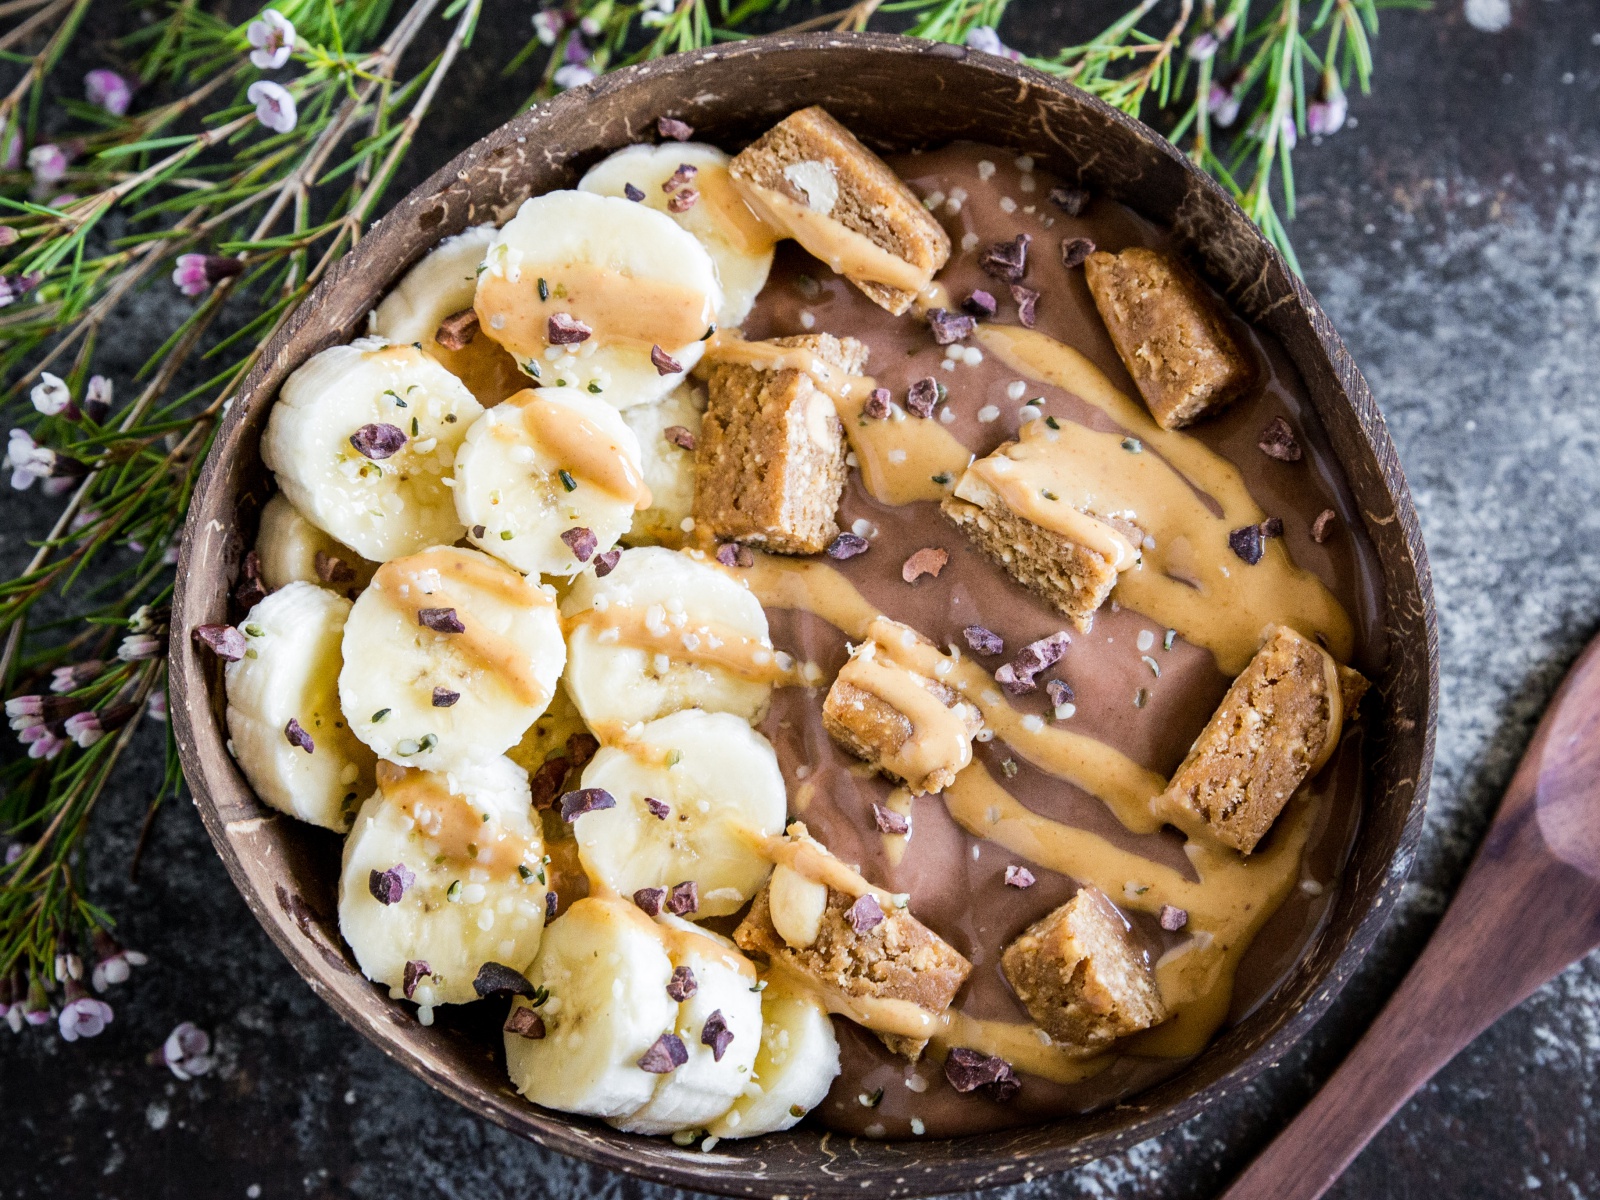 Vegan Yogurt Power Bowl topped with bananas and a nut butter drizzle